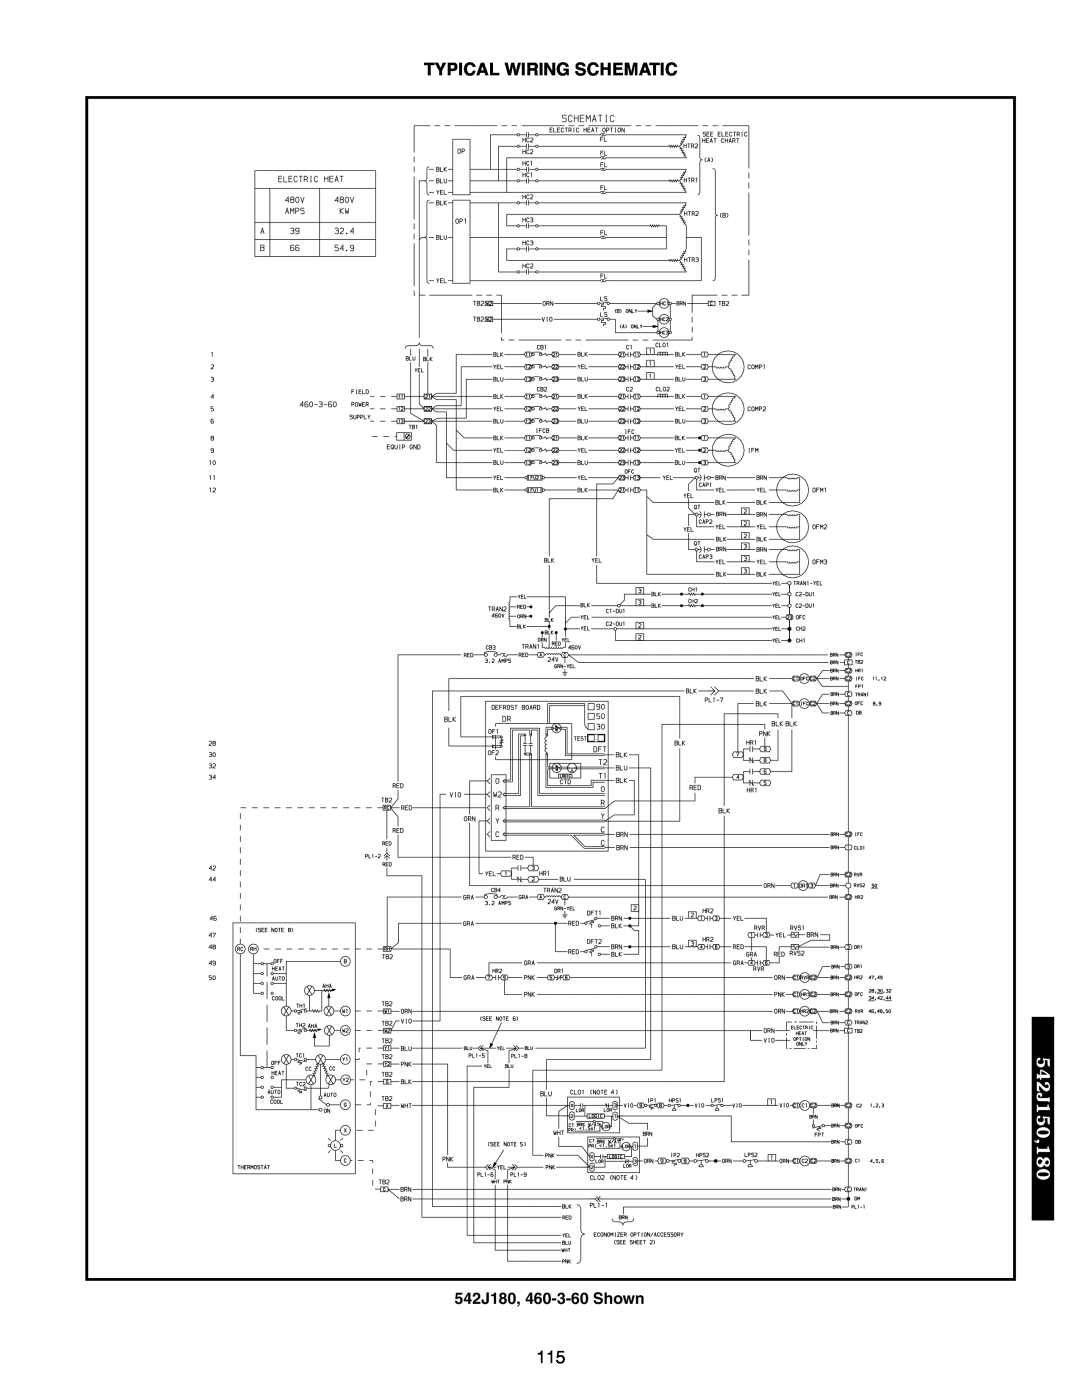 Bryant 548F, 549B manual 542J180, 460-3-60Shown, Typical Wiring Schematic, 542J150,180 